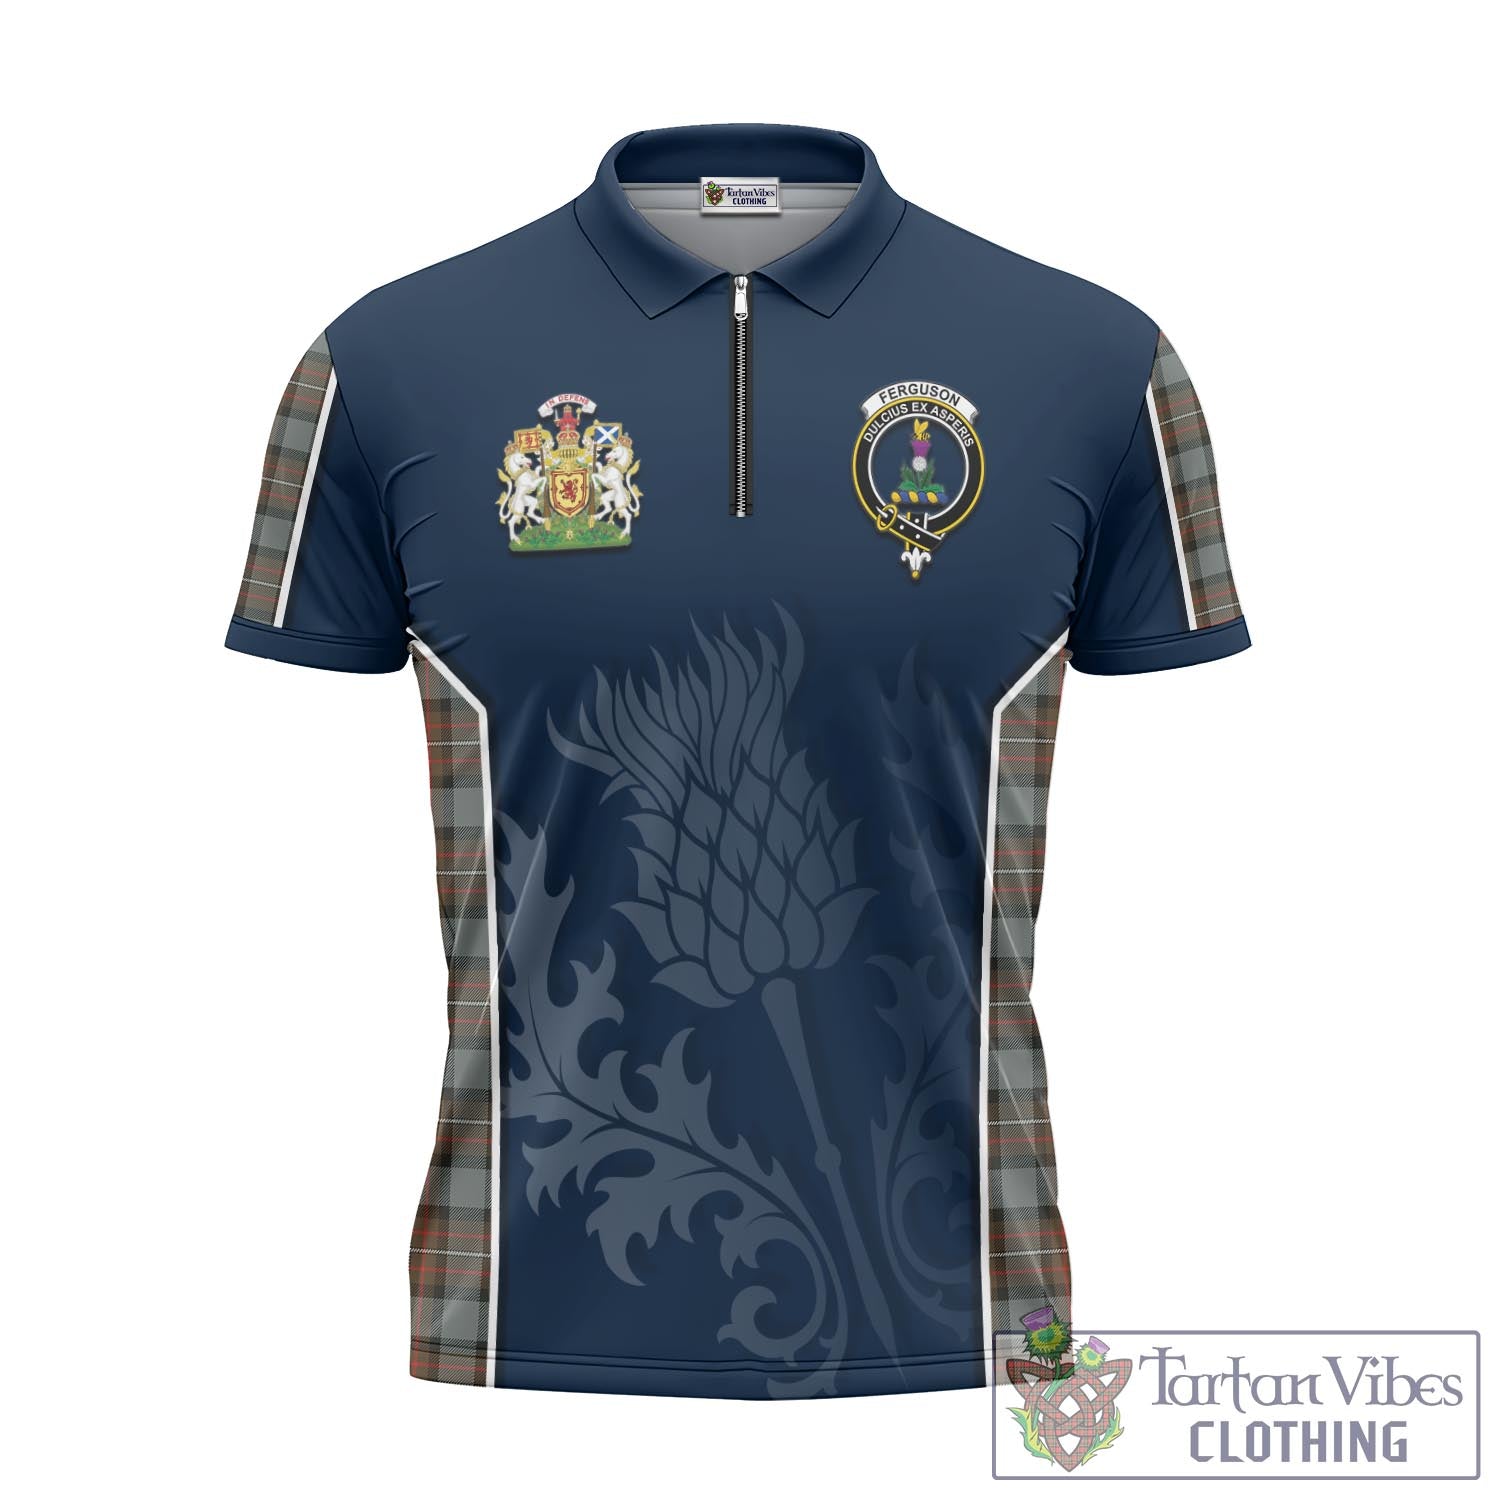 Tartan Vibes Clothing Ferguson Weathered Tartan Zipper Polo Shirt with Family Crest and Scottish Thistle Vibes Sport Style